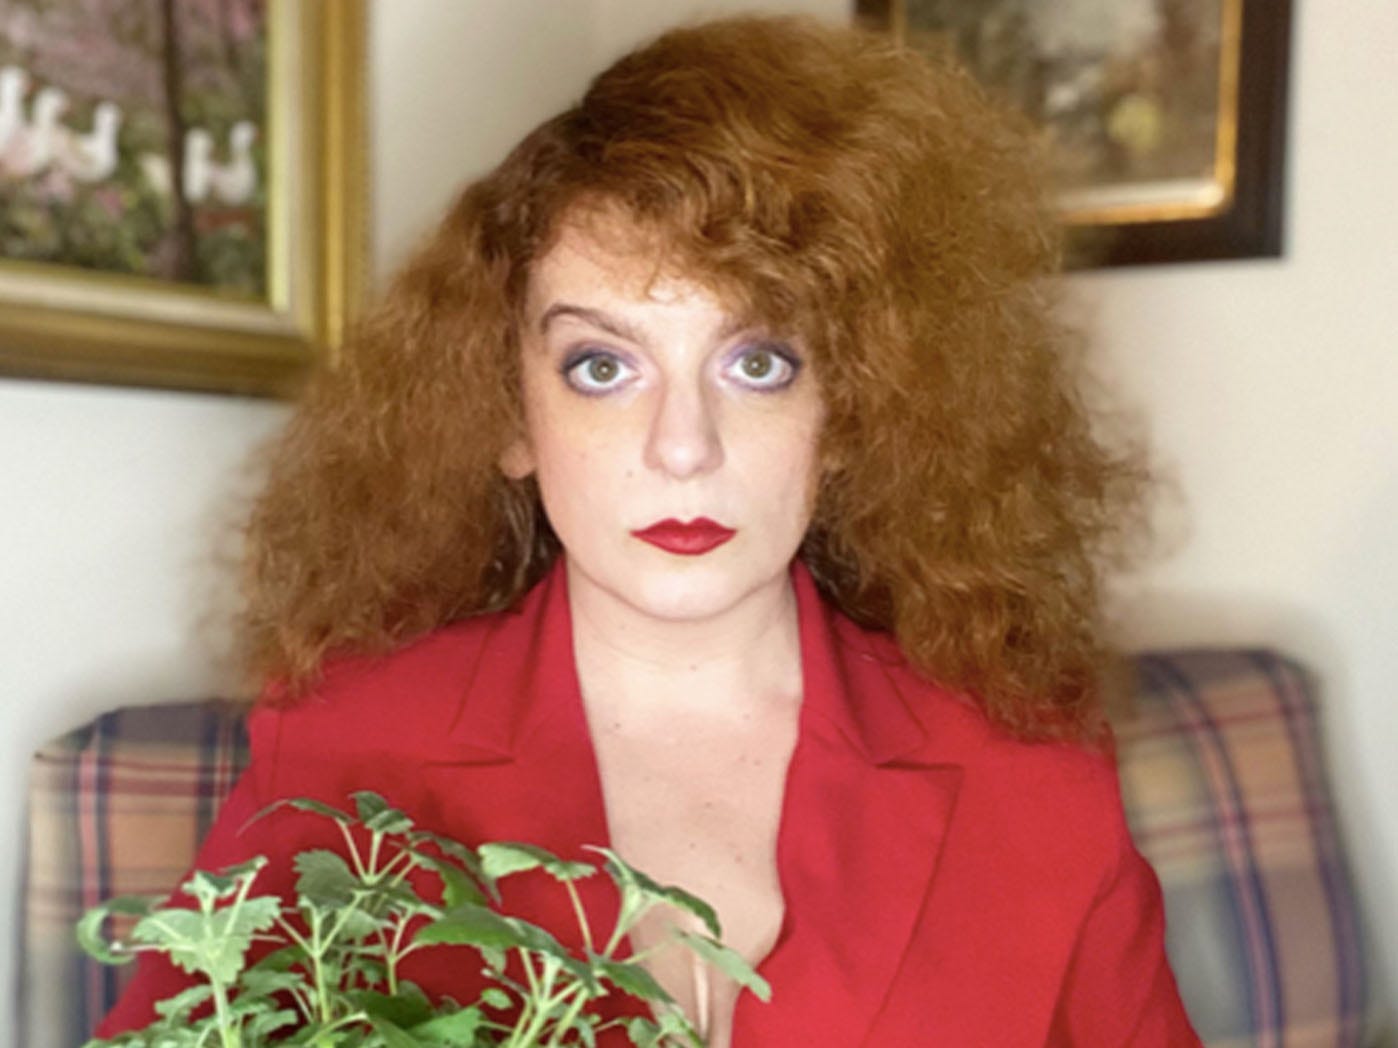 A photo of writer and performer Sara Benincasa looking quite serious as she dons a stylin' red blazer and holds a houseplant.